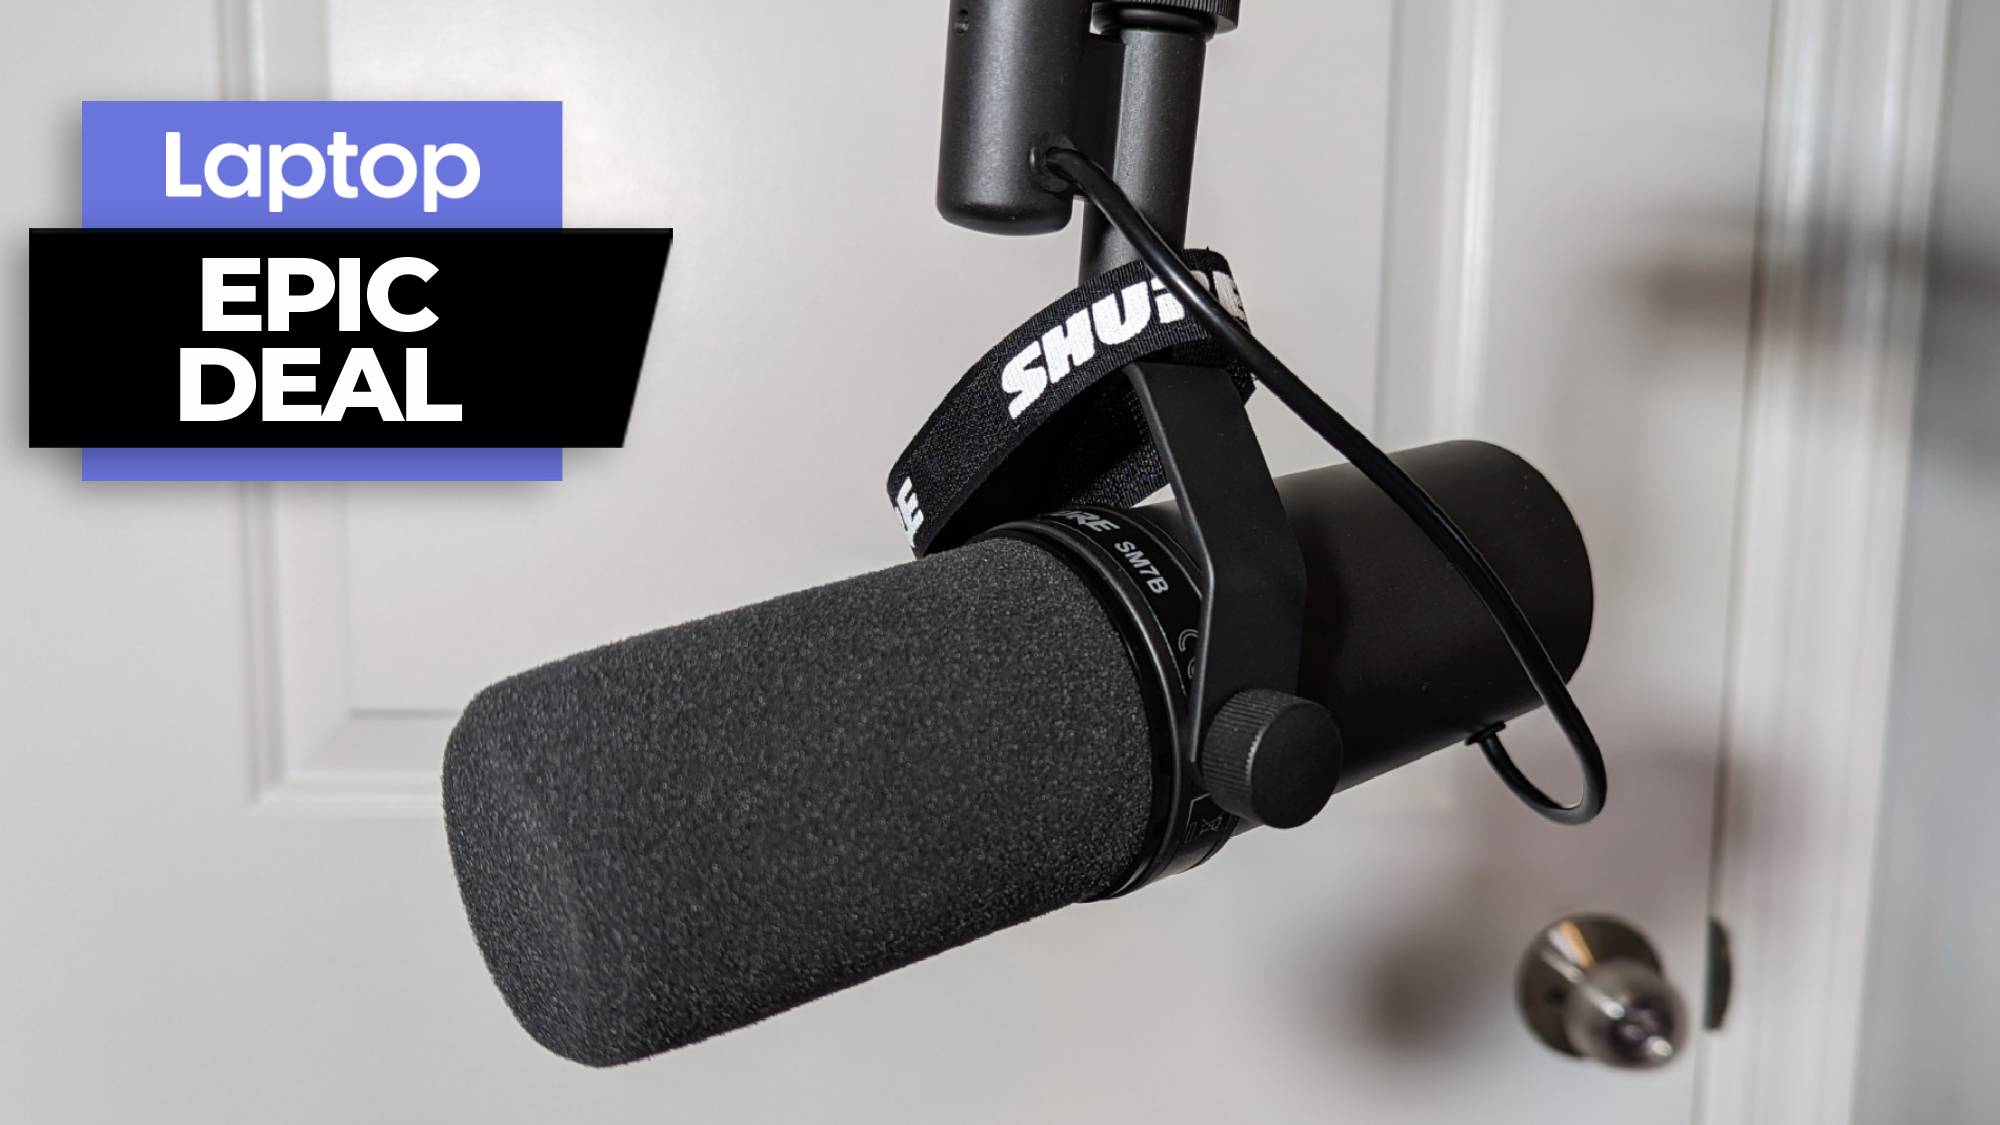 Review: The Shure SM7B – A Mic For All Seasons –